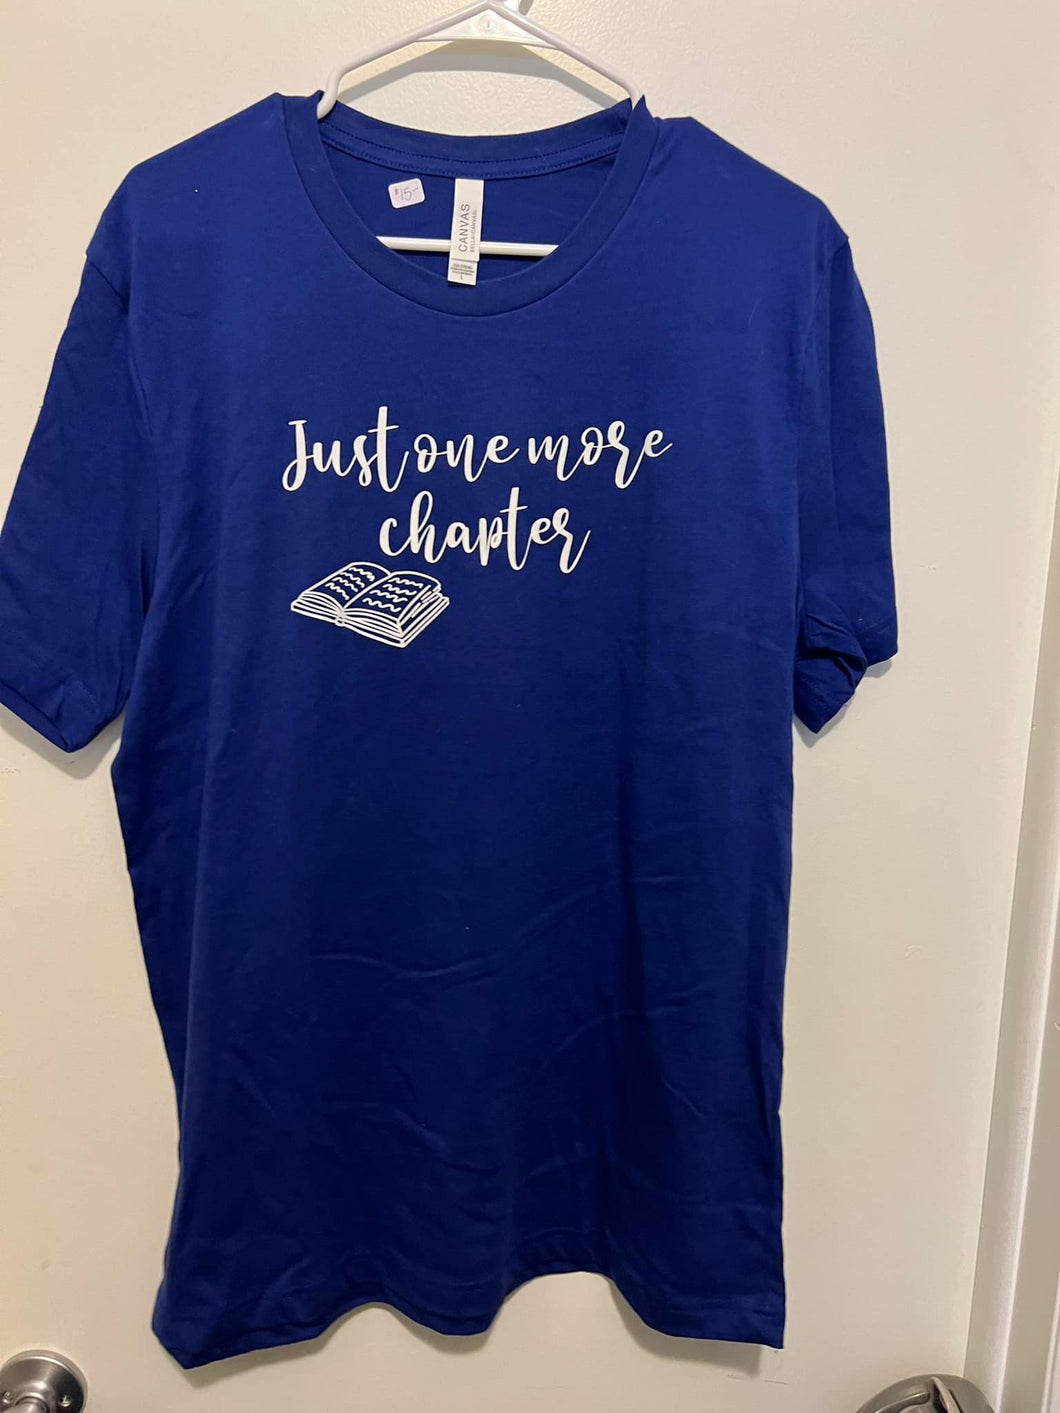 One More Chapter Shirt - Size Large